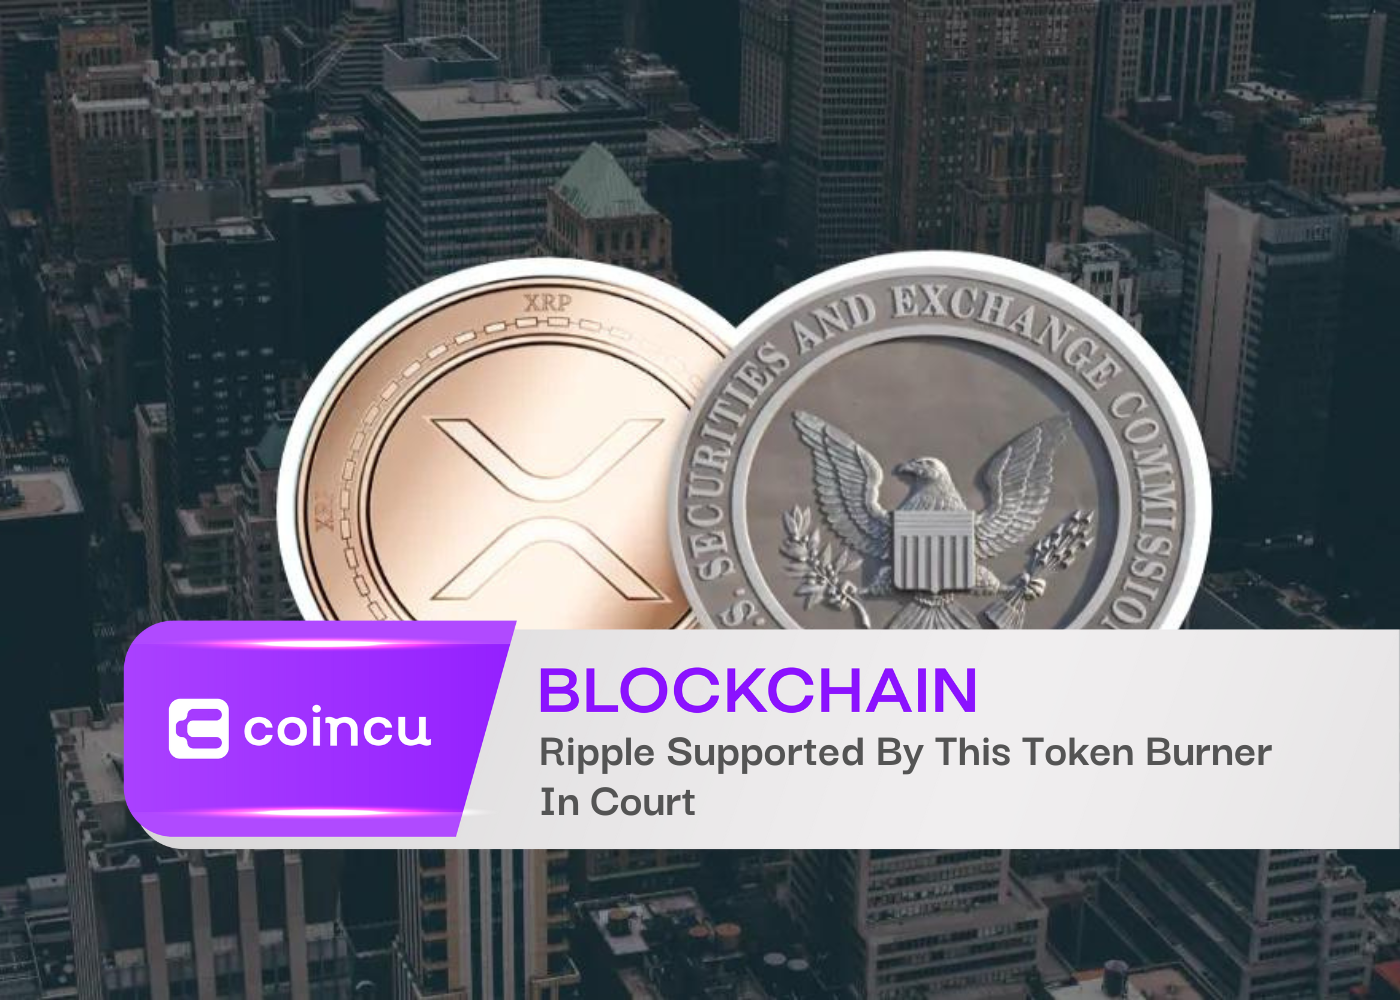 Ripple Supported By This Token Burner